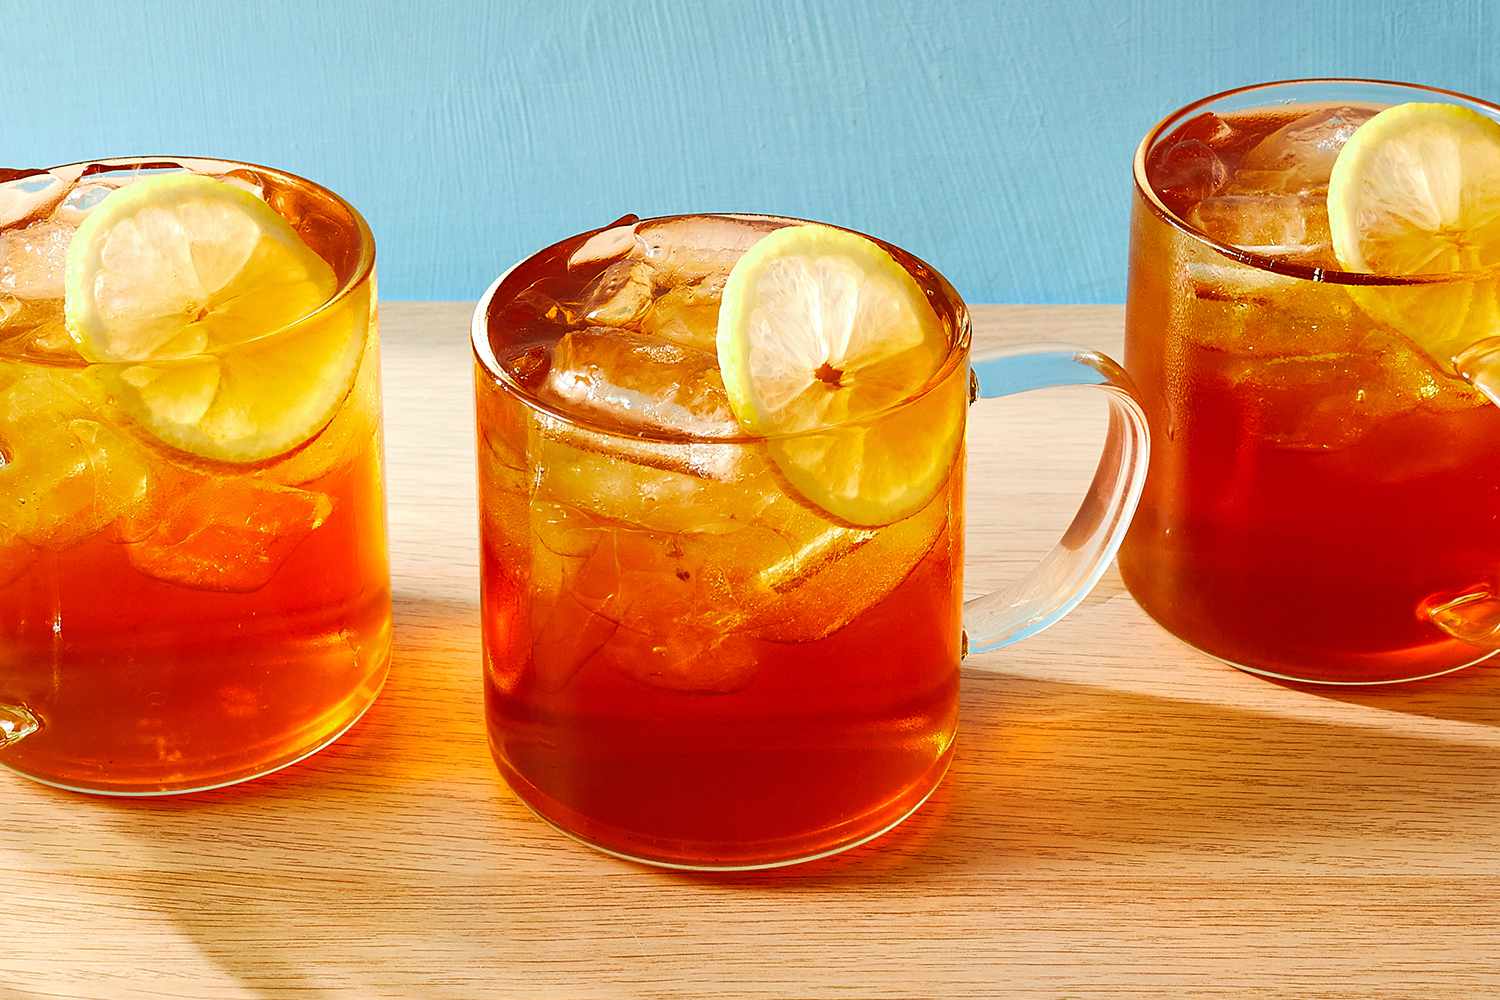 What Alcohol Goes with Sweet Tea